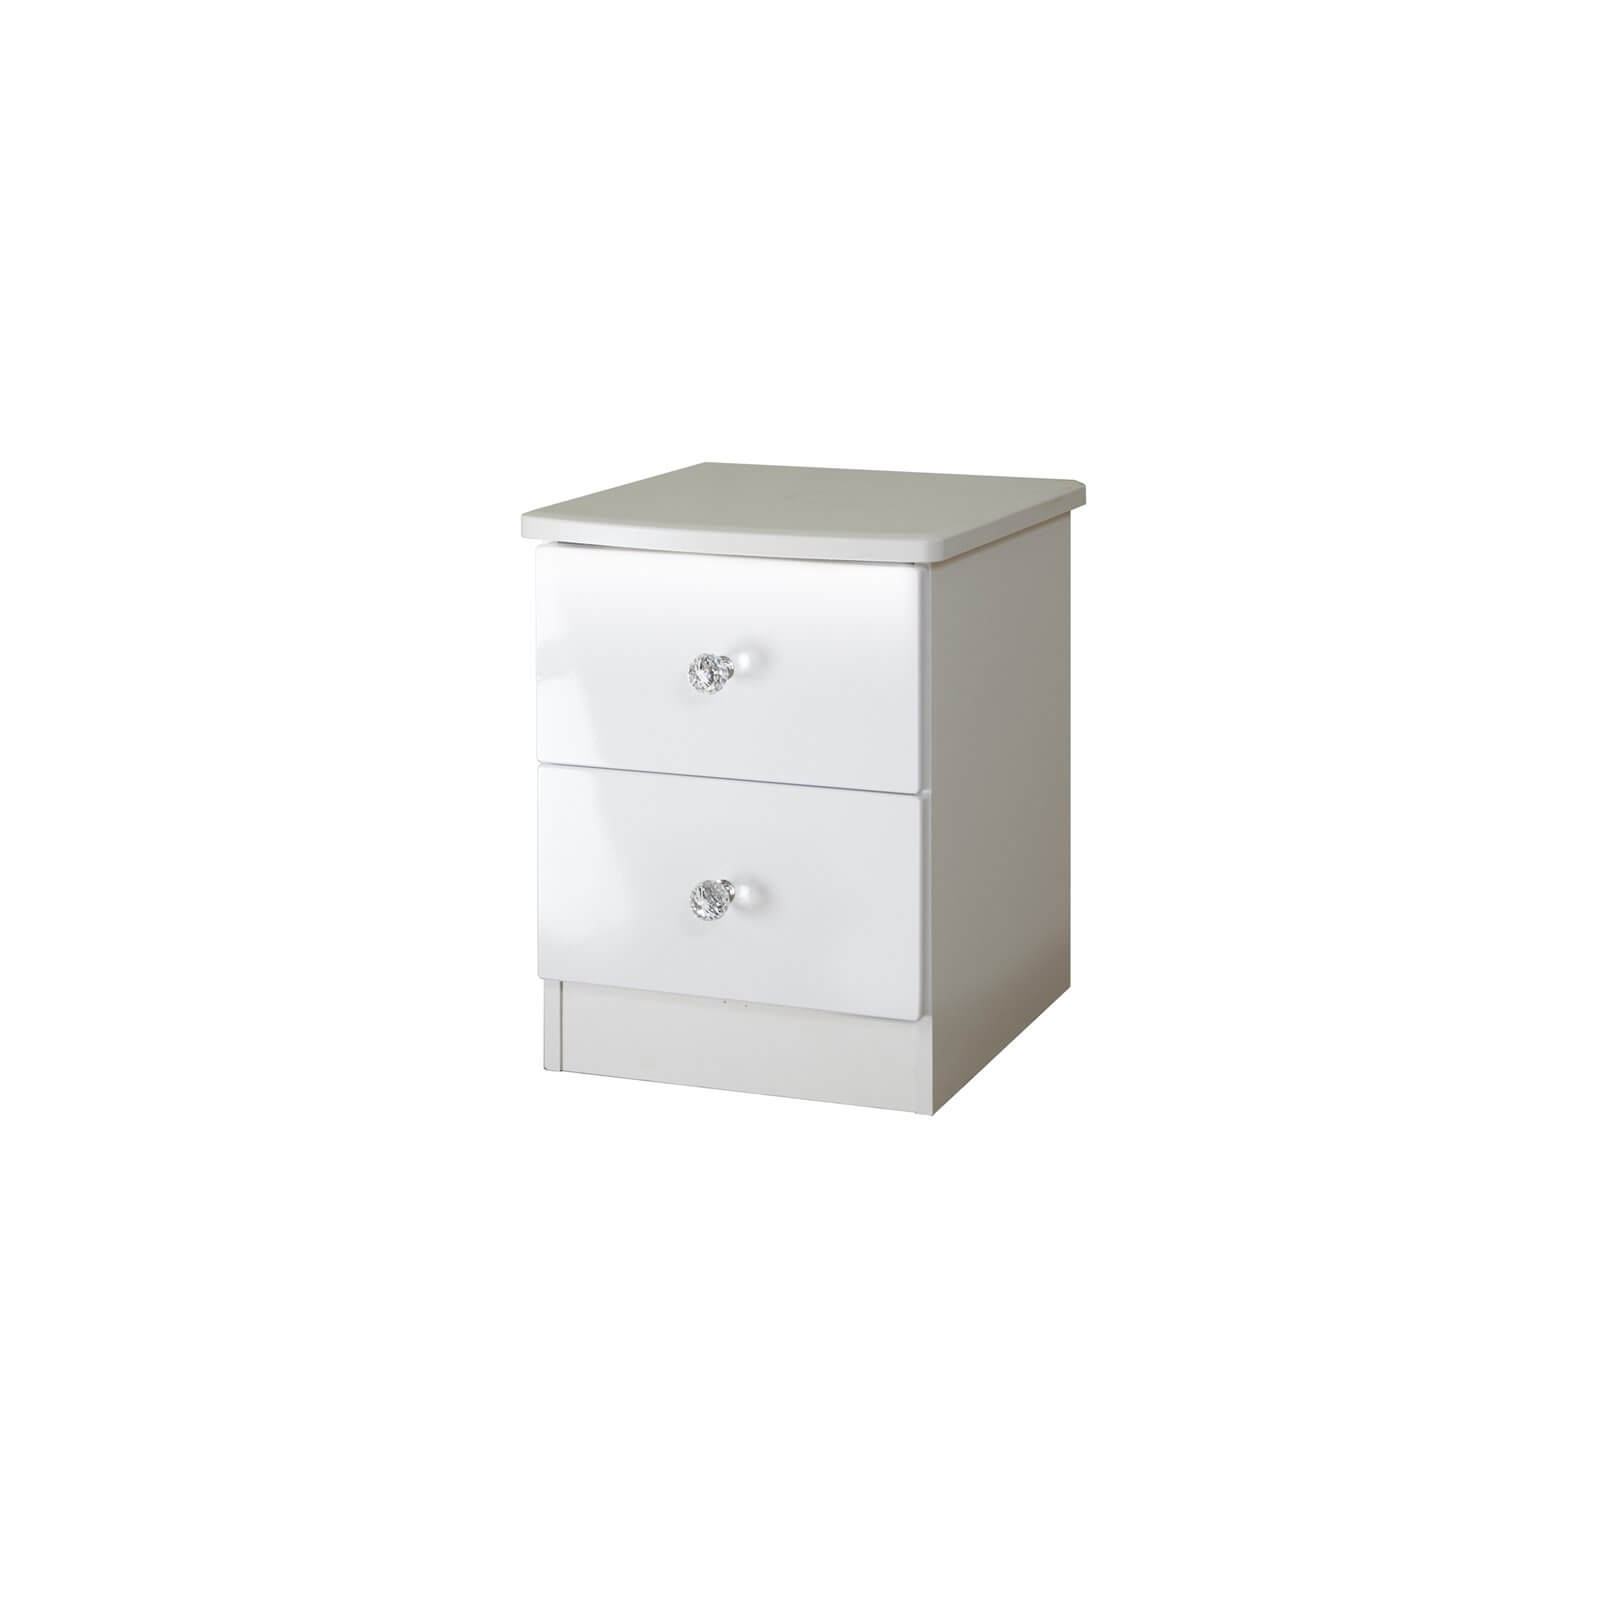 Lumo 2 Drawer Bedside Table with LED Lighting - White